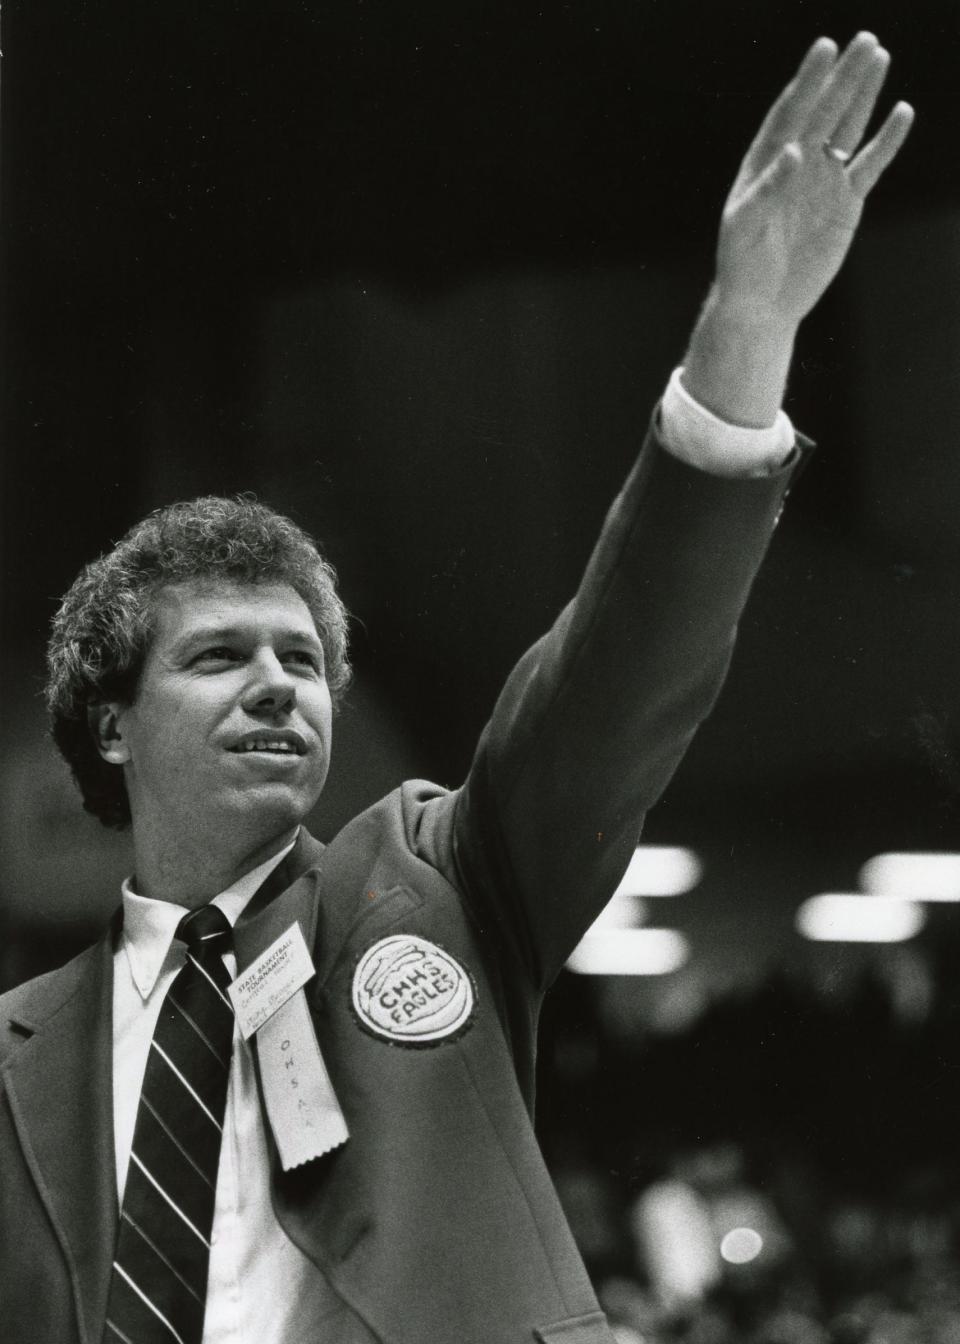 Former Central-Hower boys basketball coach Mike Meneer waves to the crowd after the team captured the Class AAA state championship in 1986.